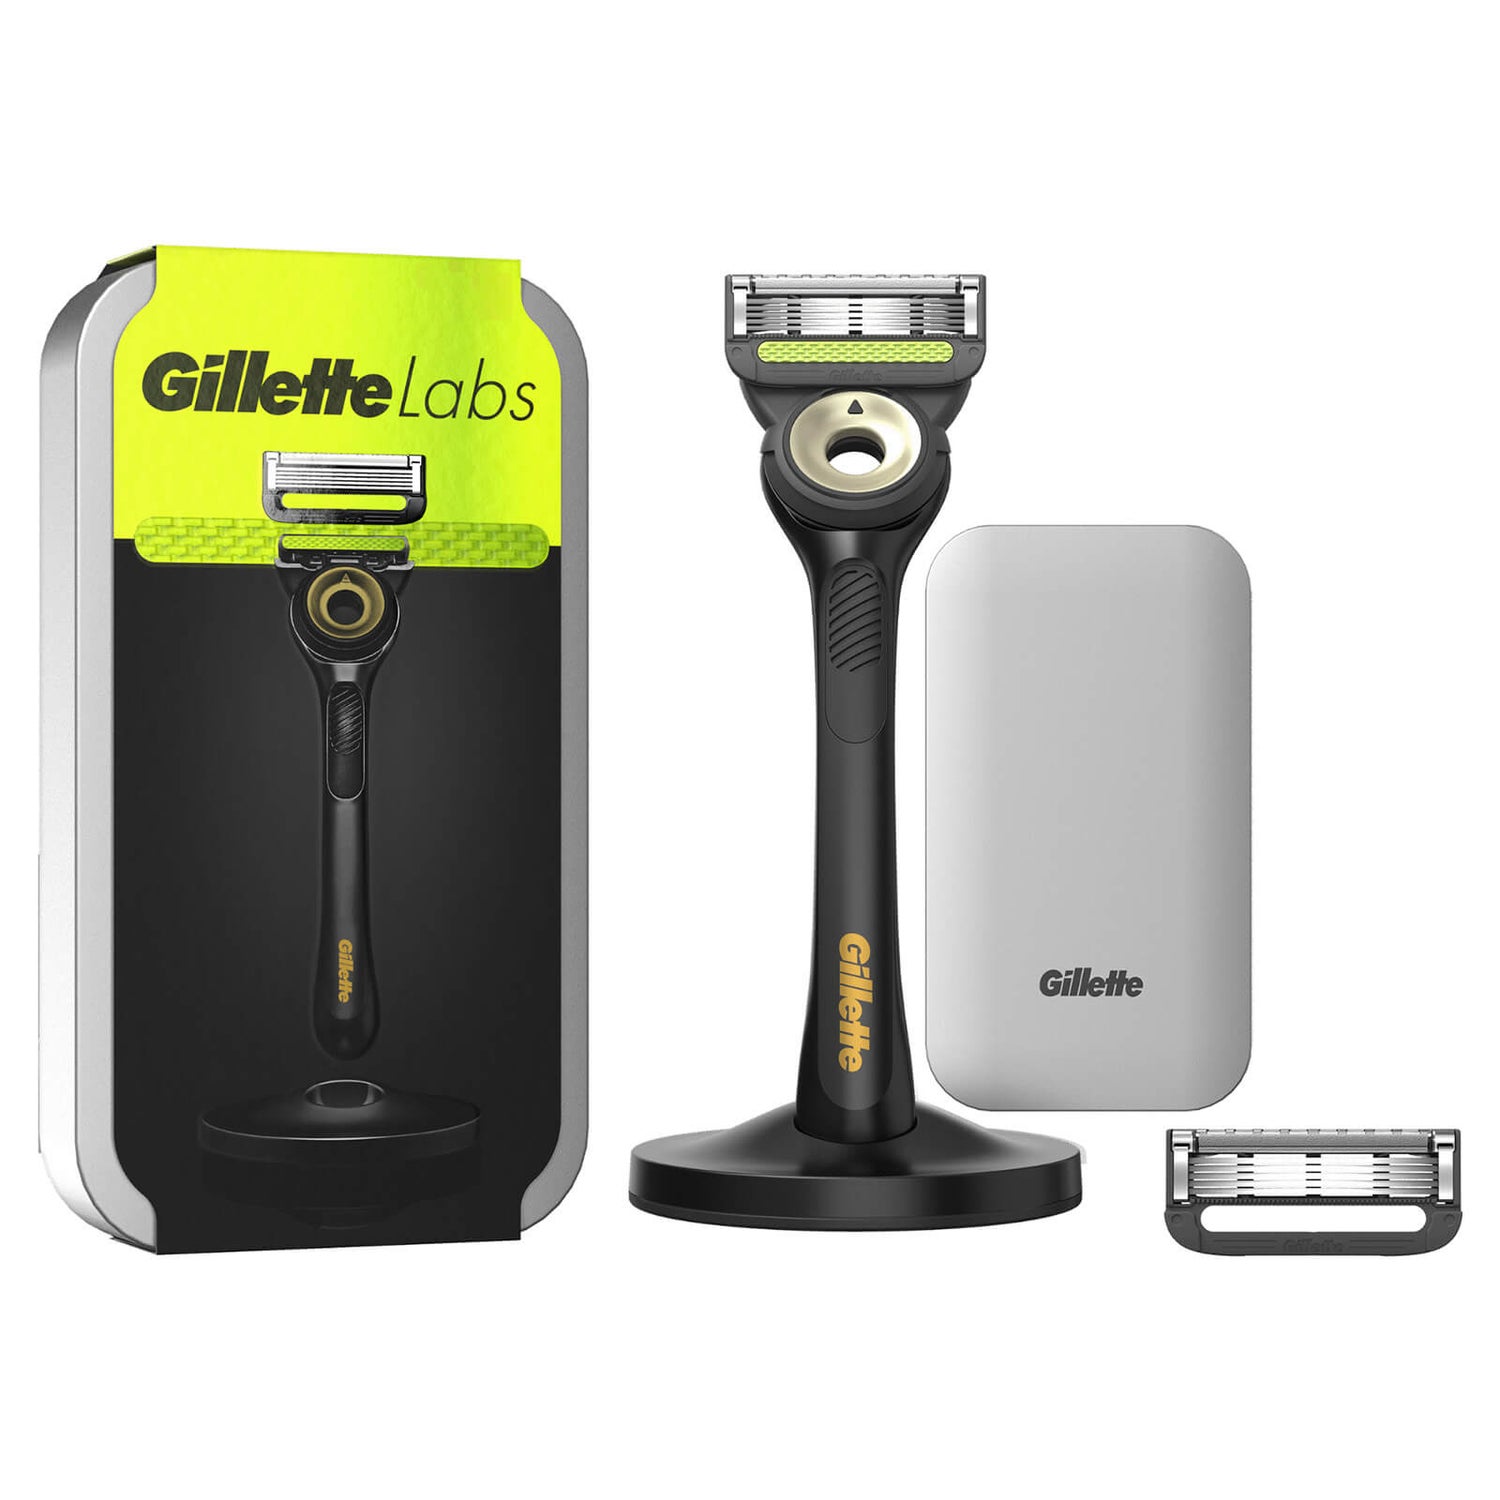 Gillette Labs Exfoliating Razor with Magnetic Stand Black & Gold Edition, Travel Case and 1 Razor Blades Refill